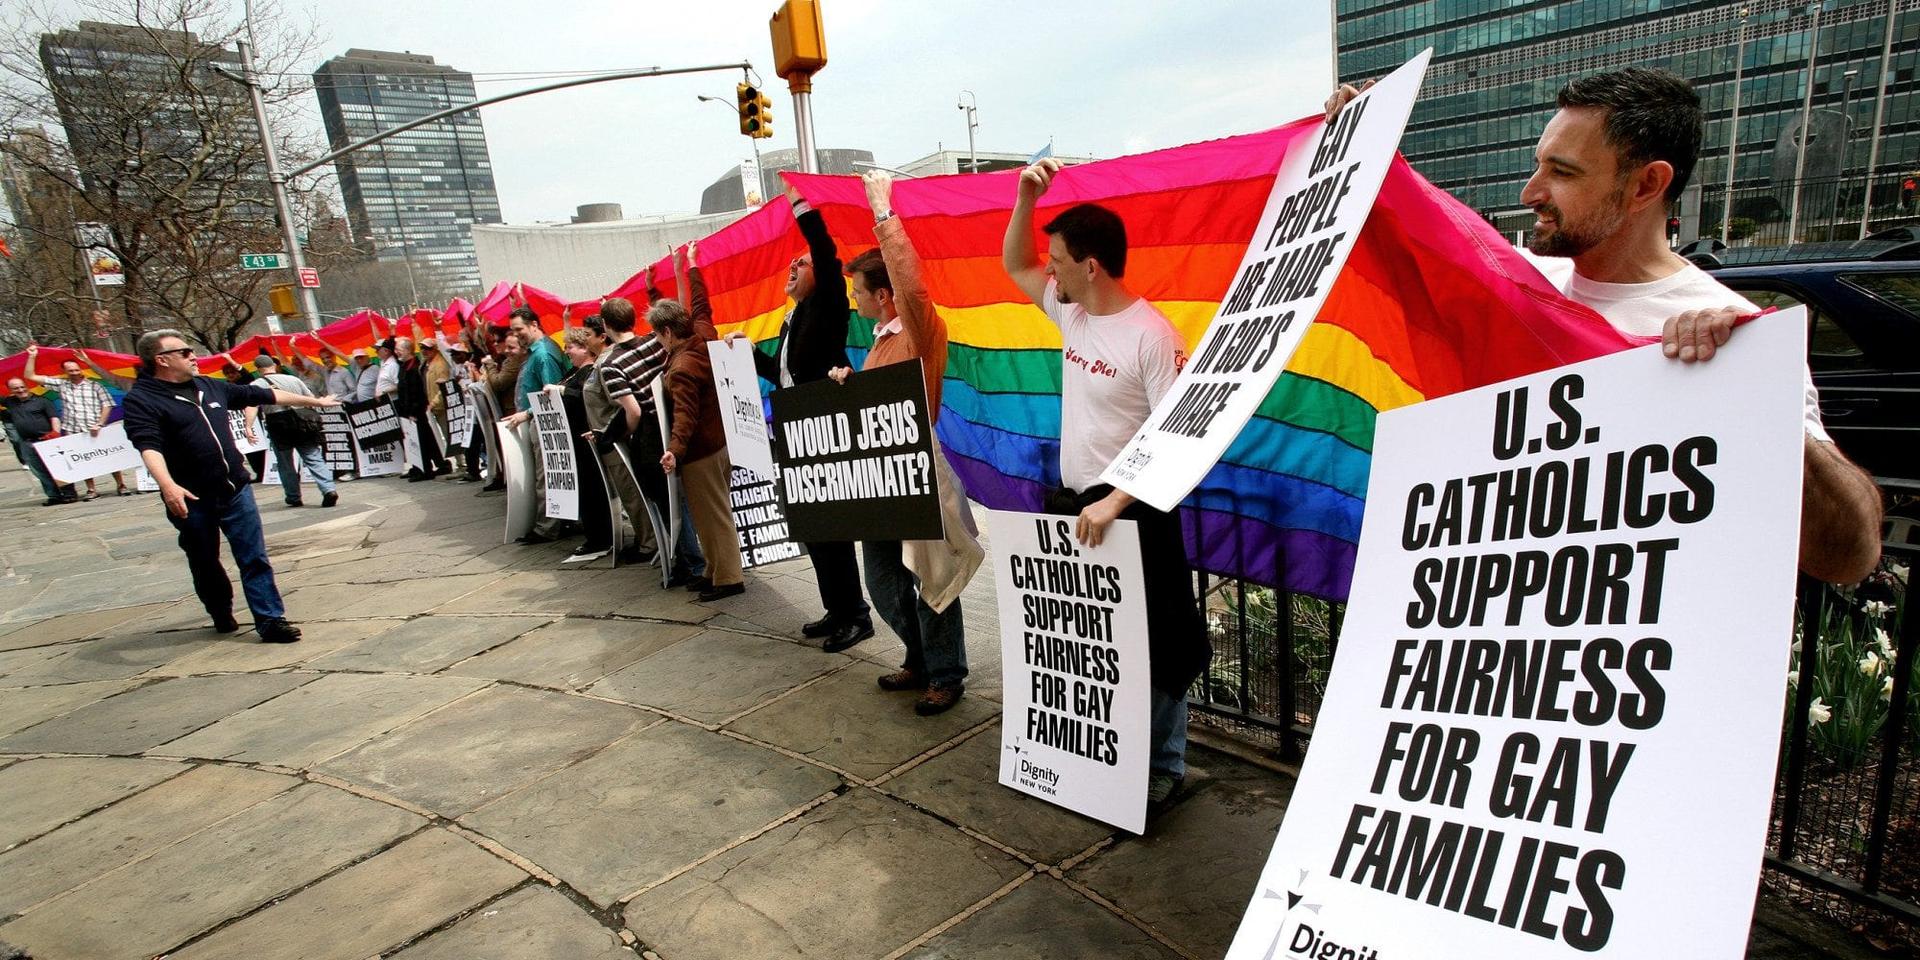 Saying ‘sorry’ to gays a good step, but change still needed